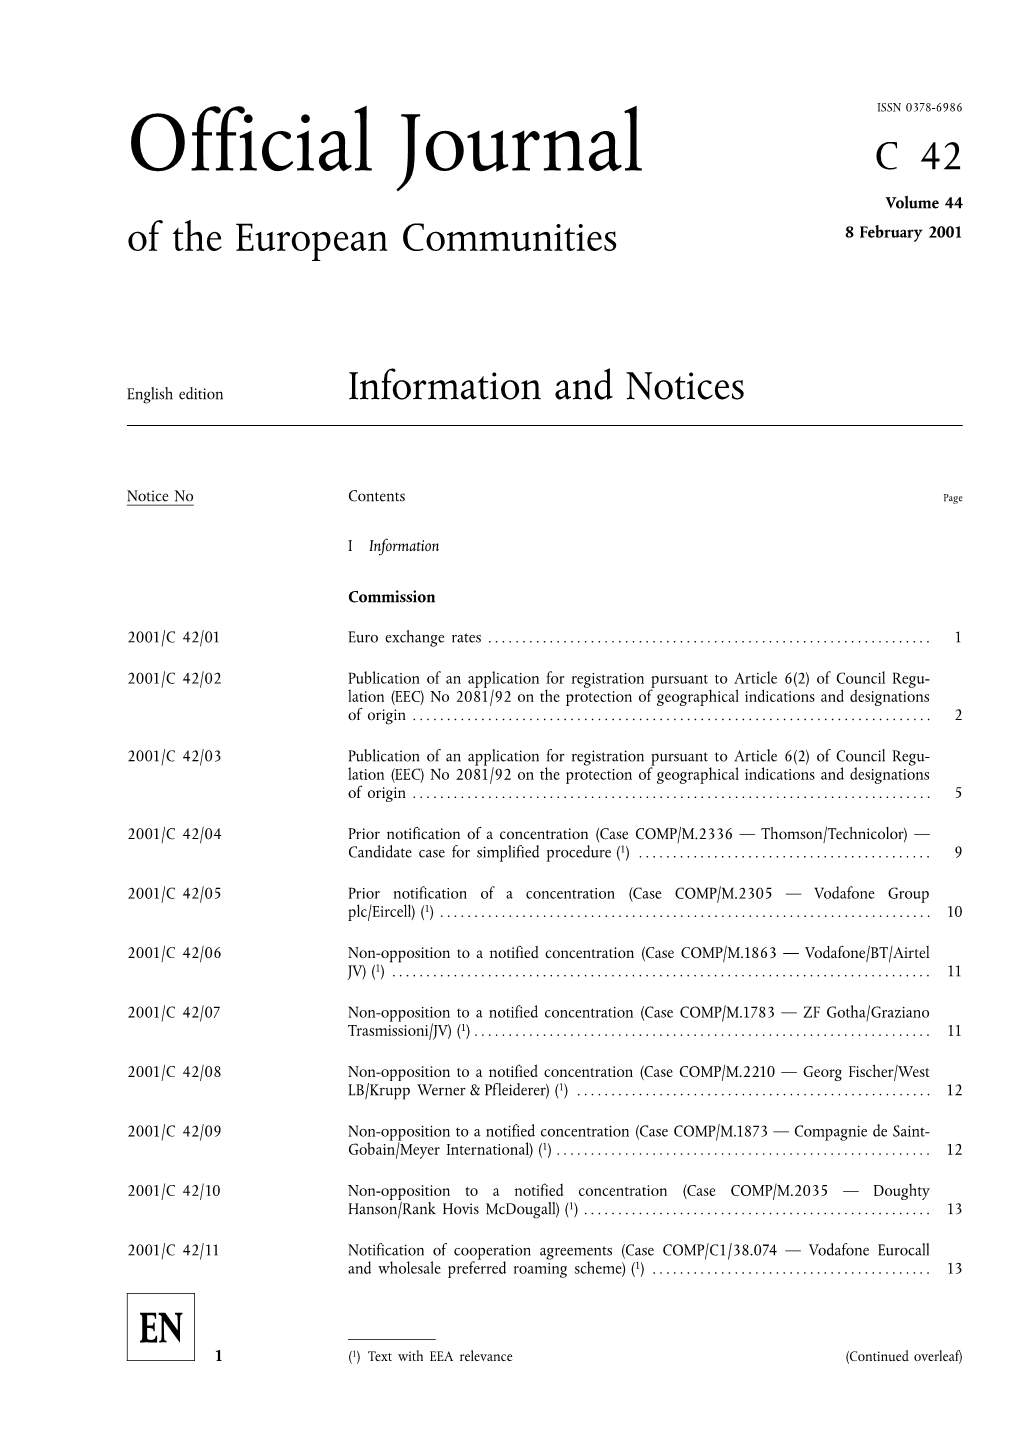 Official Journal C42 Volume 44 of the European Communities 8 February 2001